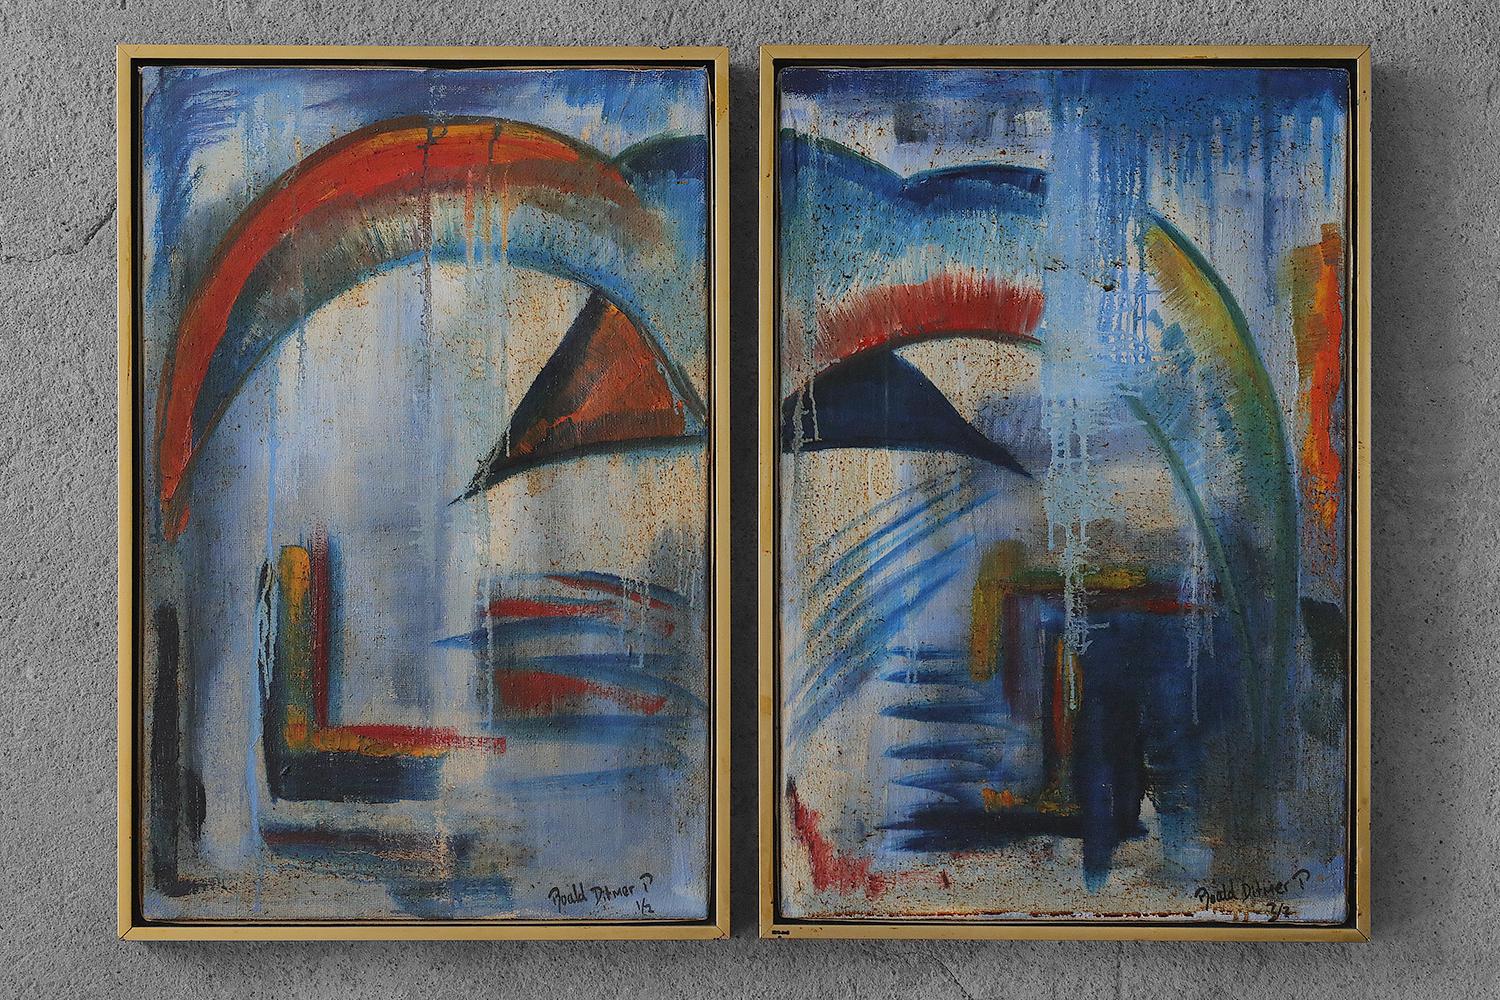 Roald Ditmer, Abstract Composition
Oil on canvas
Number 1/2, 2/2
The work signed by the artist's signature and an individual number
Work dimensions 65/45
Framed work

Roald Ditmer was born in 1959. He is a Danish artist who specializes in oil